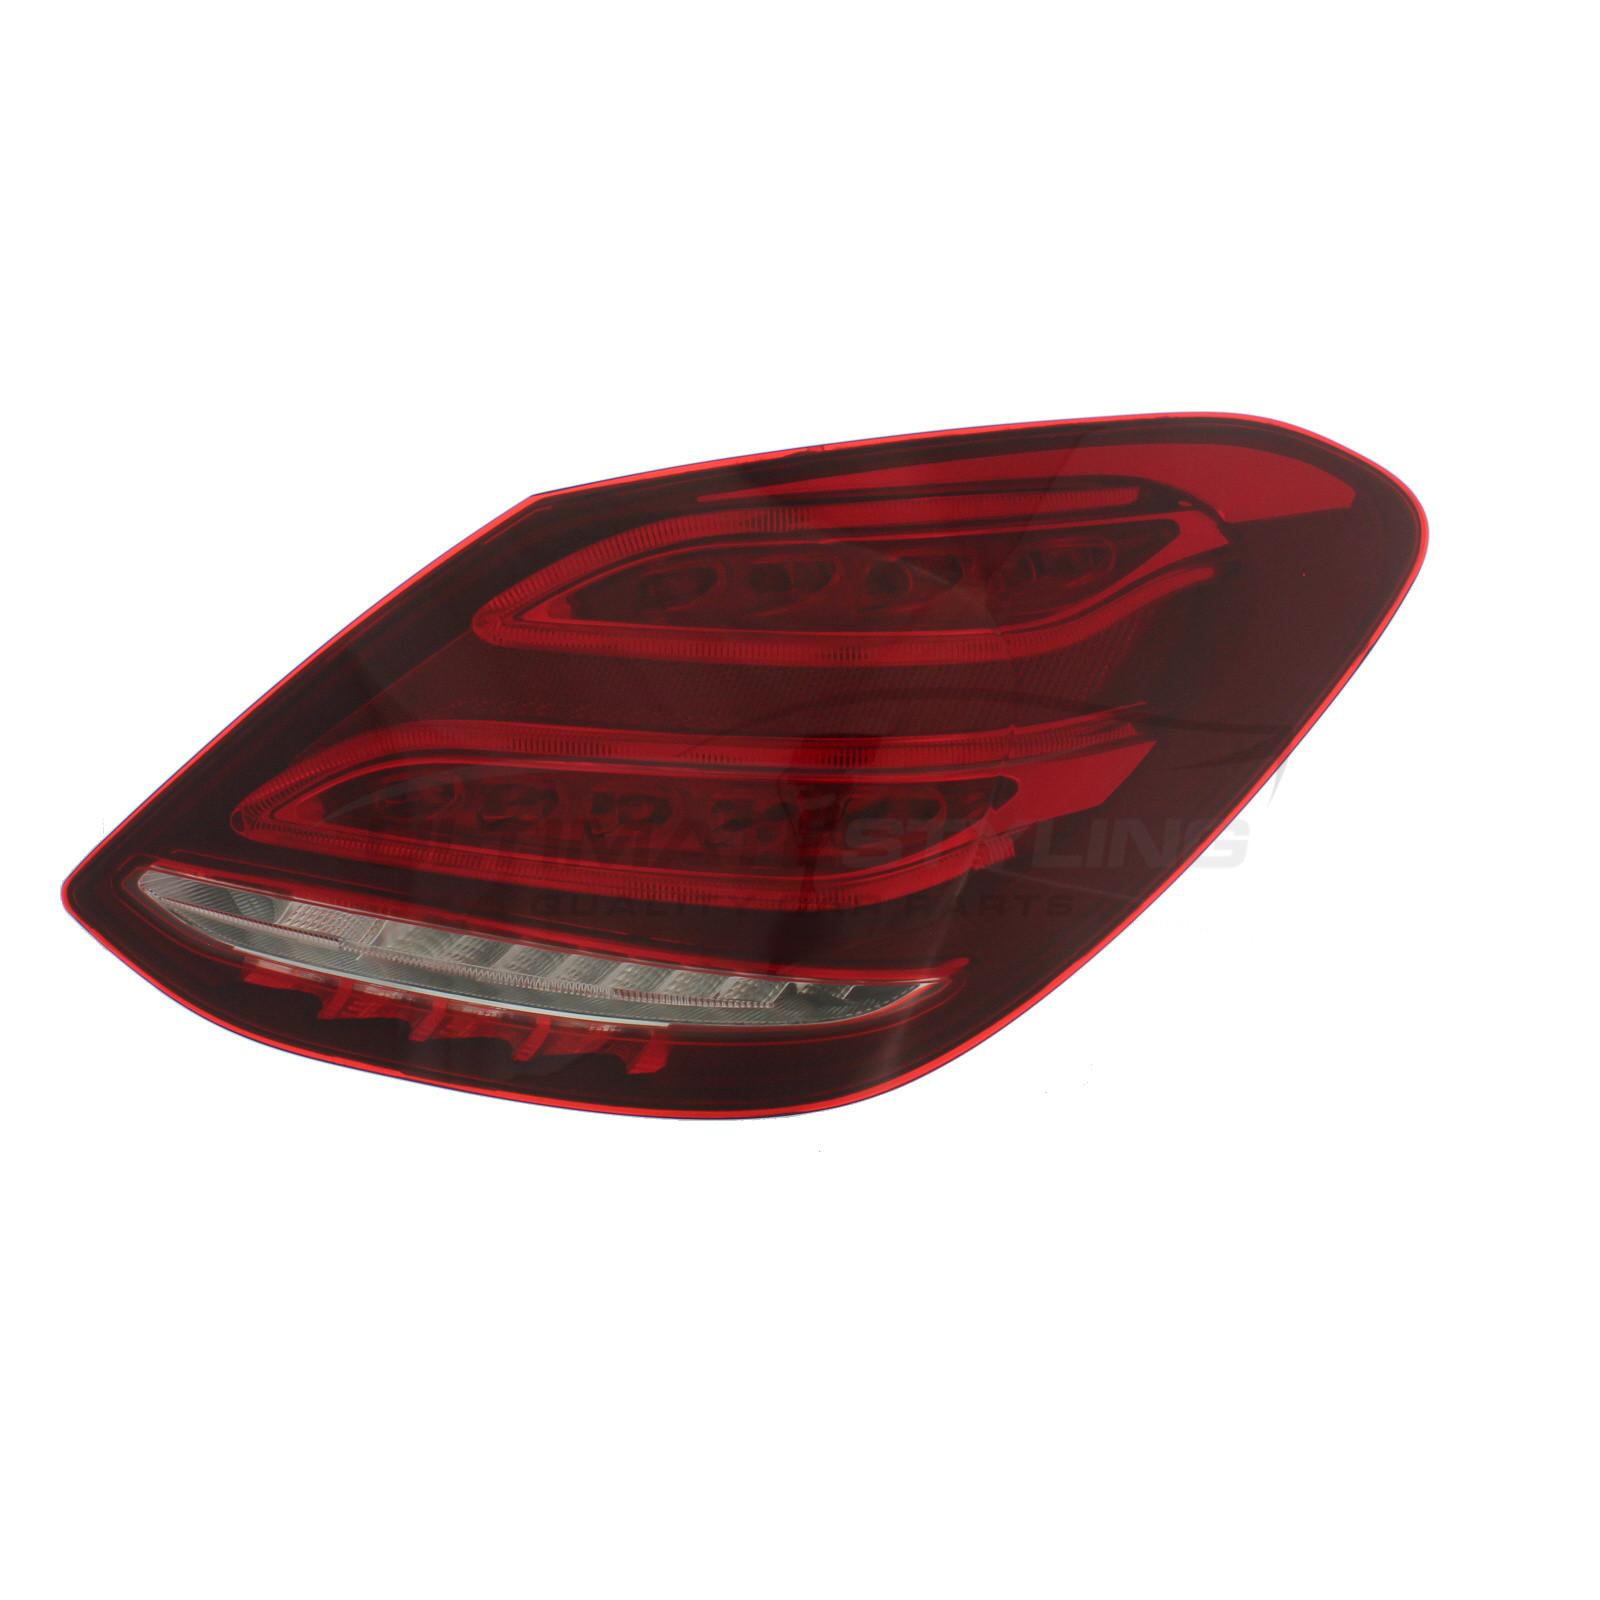 Mercedes Benz C Class 2014-2018 LED with Clear Indicator Rear Light / Tail Light Including Bulb Holder Drivers Side (RH)